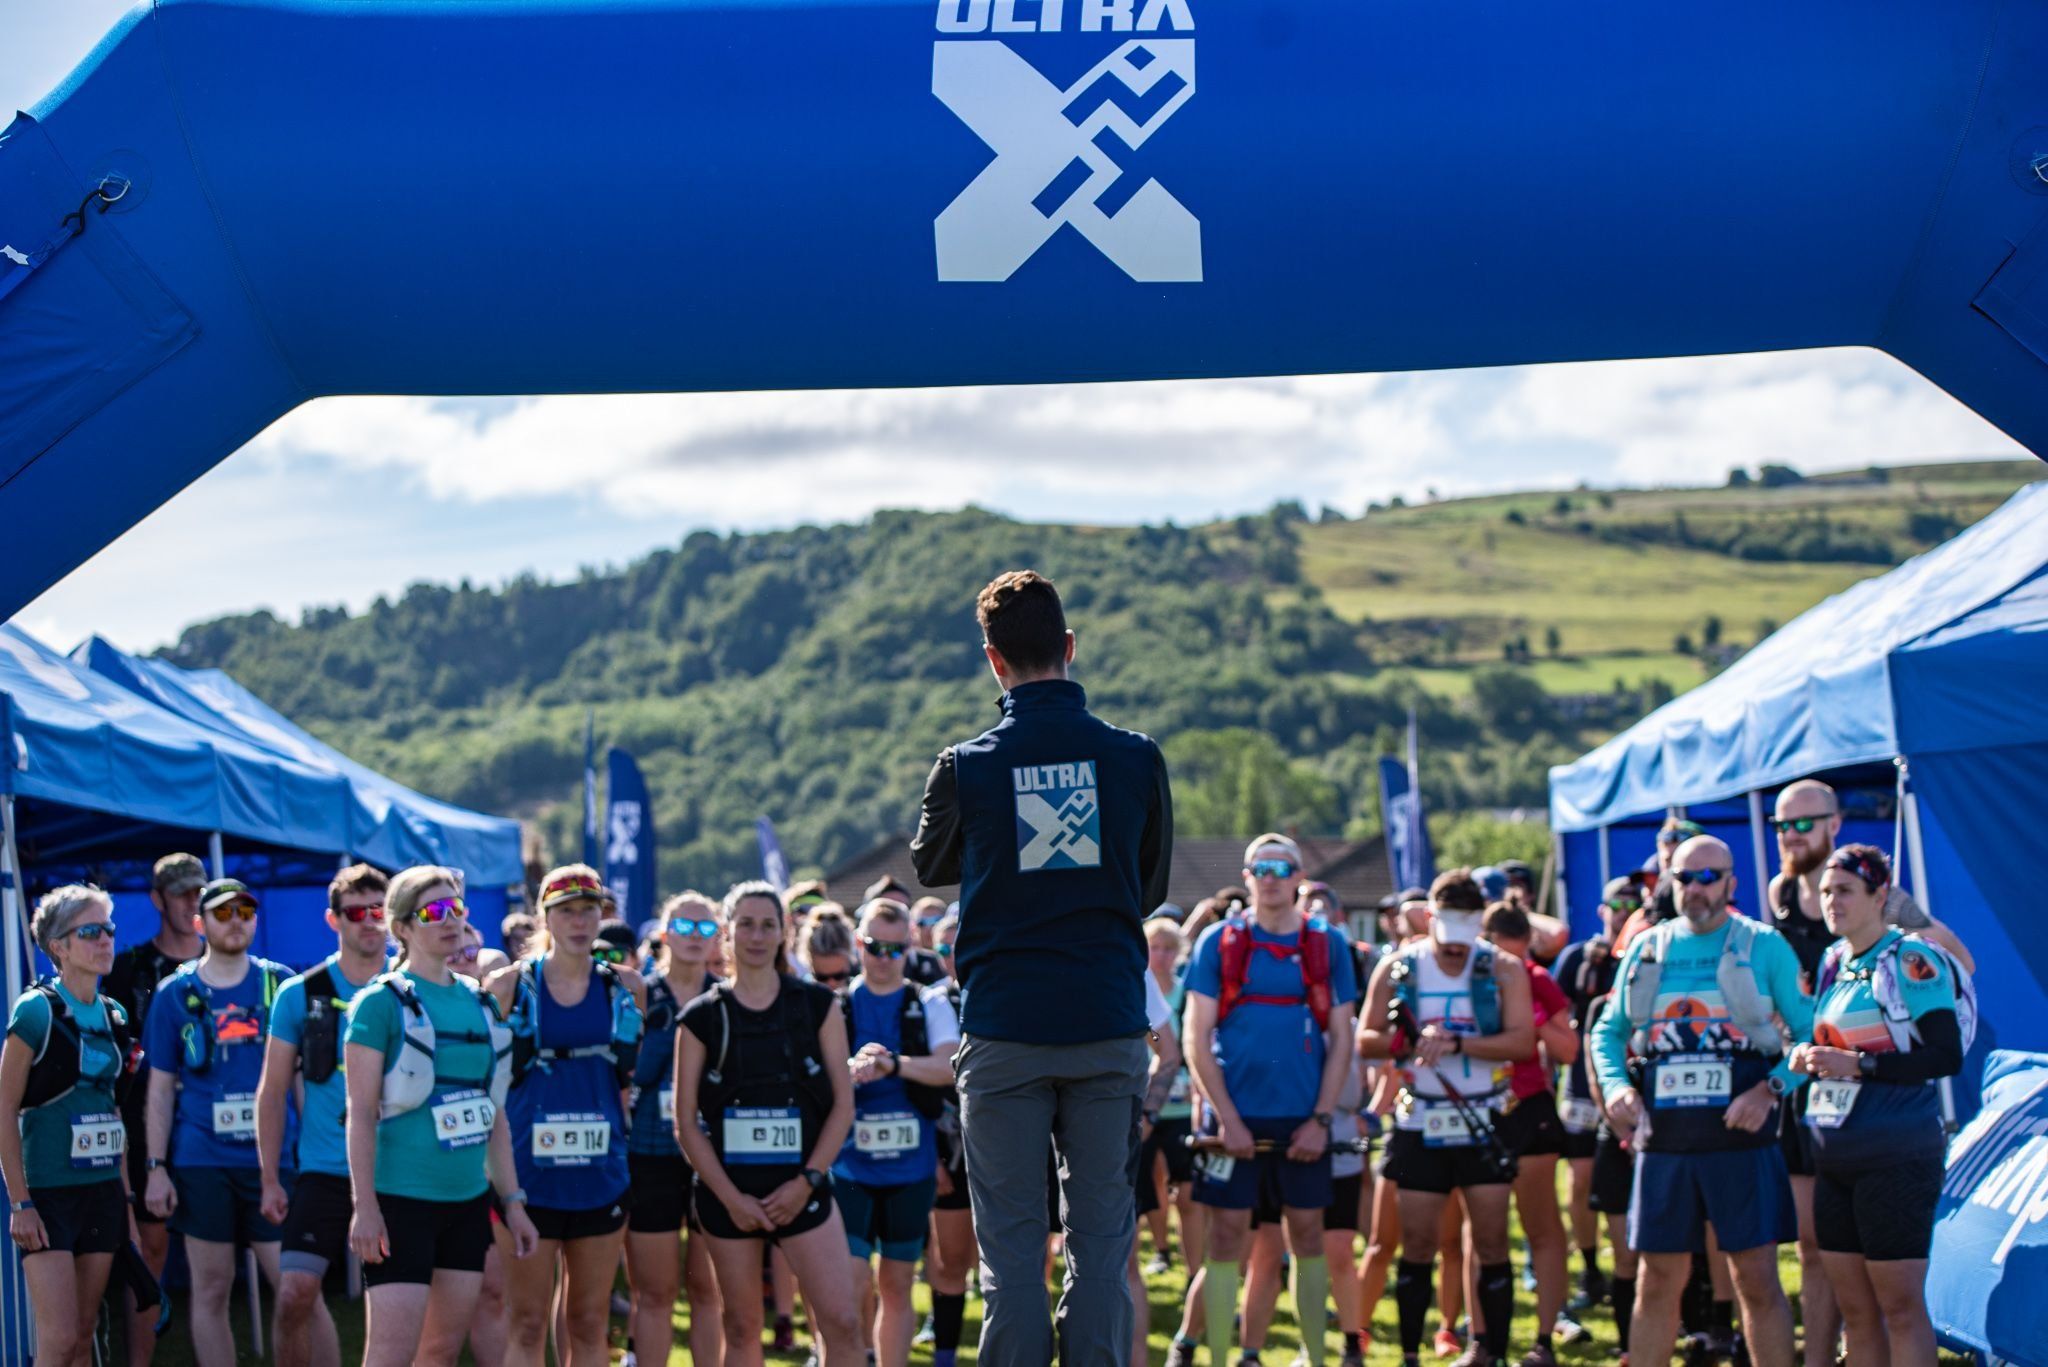 Sam briefing runners on the start-line ahead of a 2022 Ultra X race